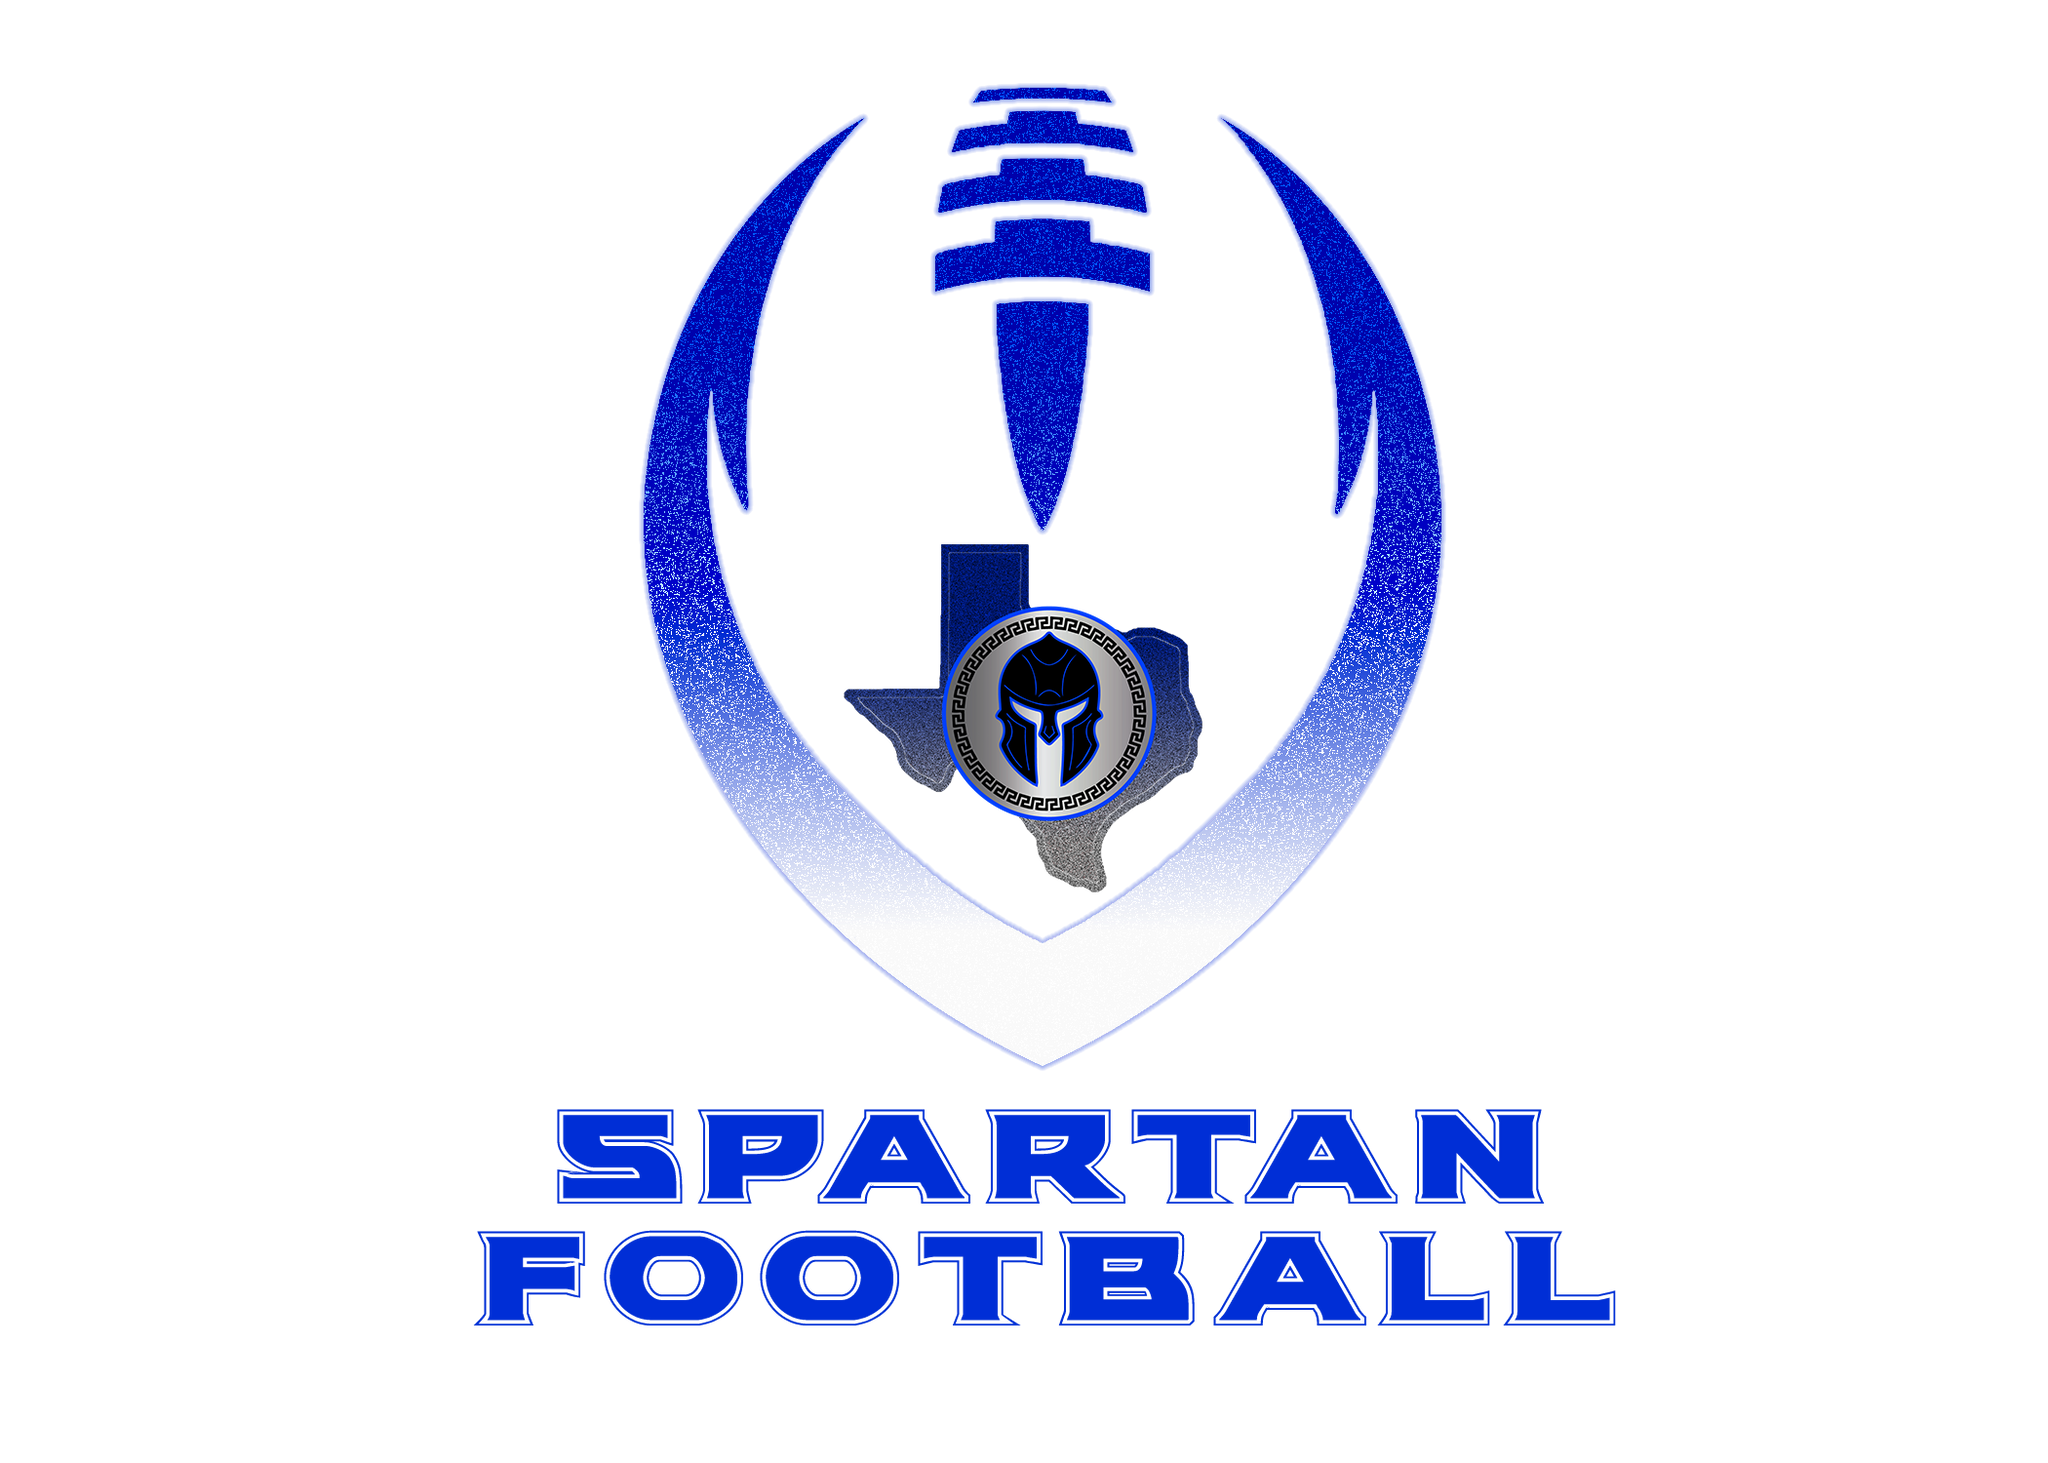 Spartans Footbal tees and images